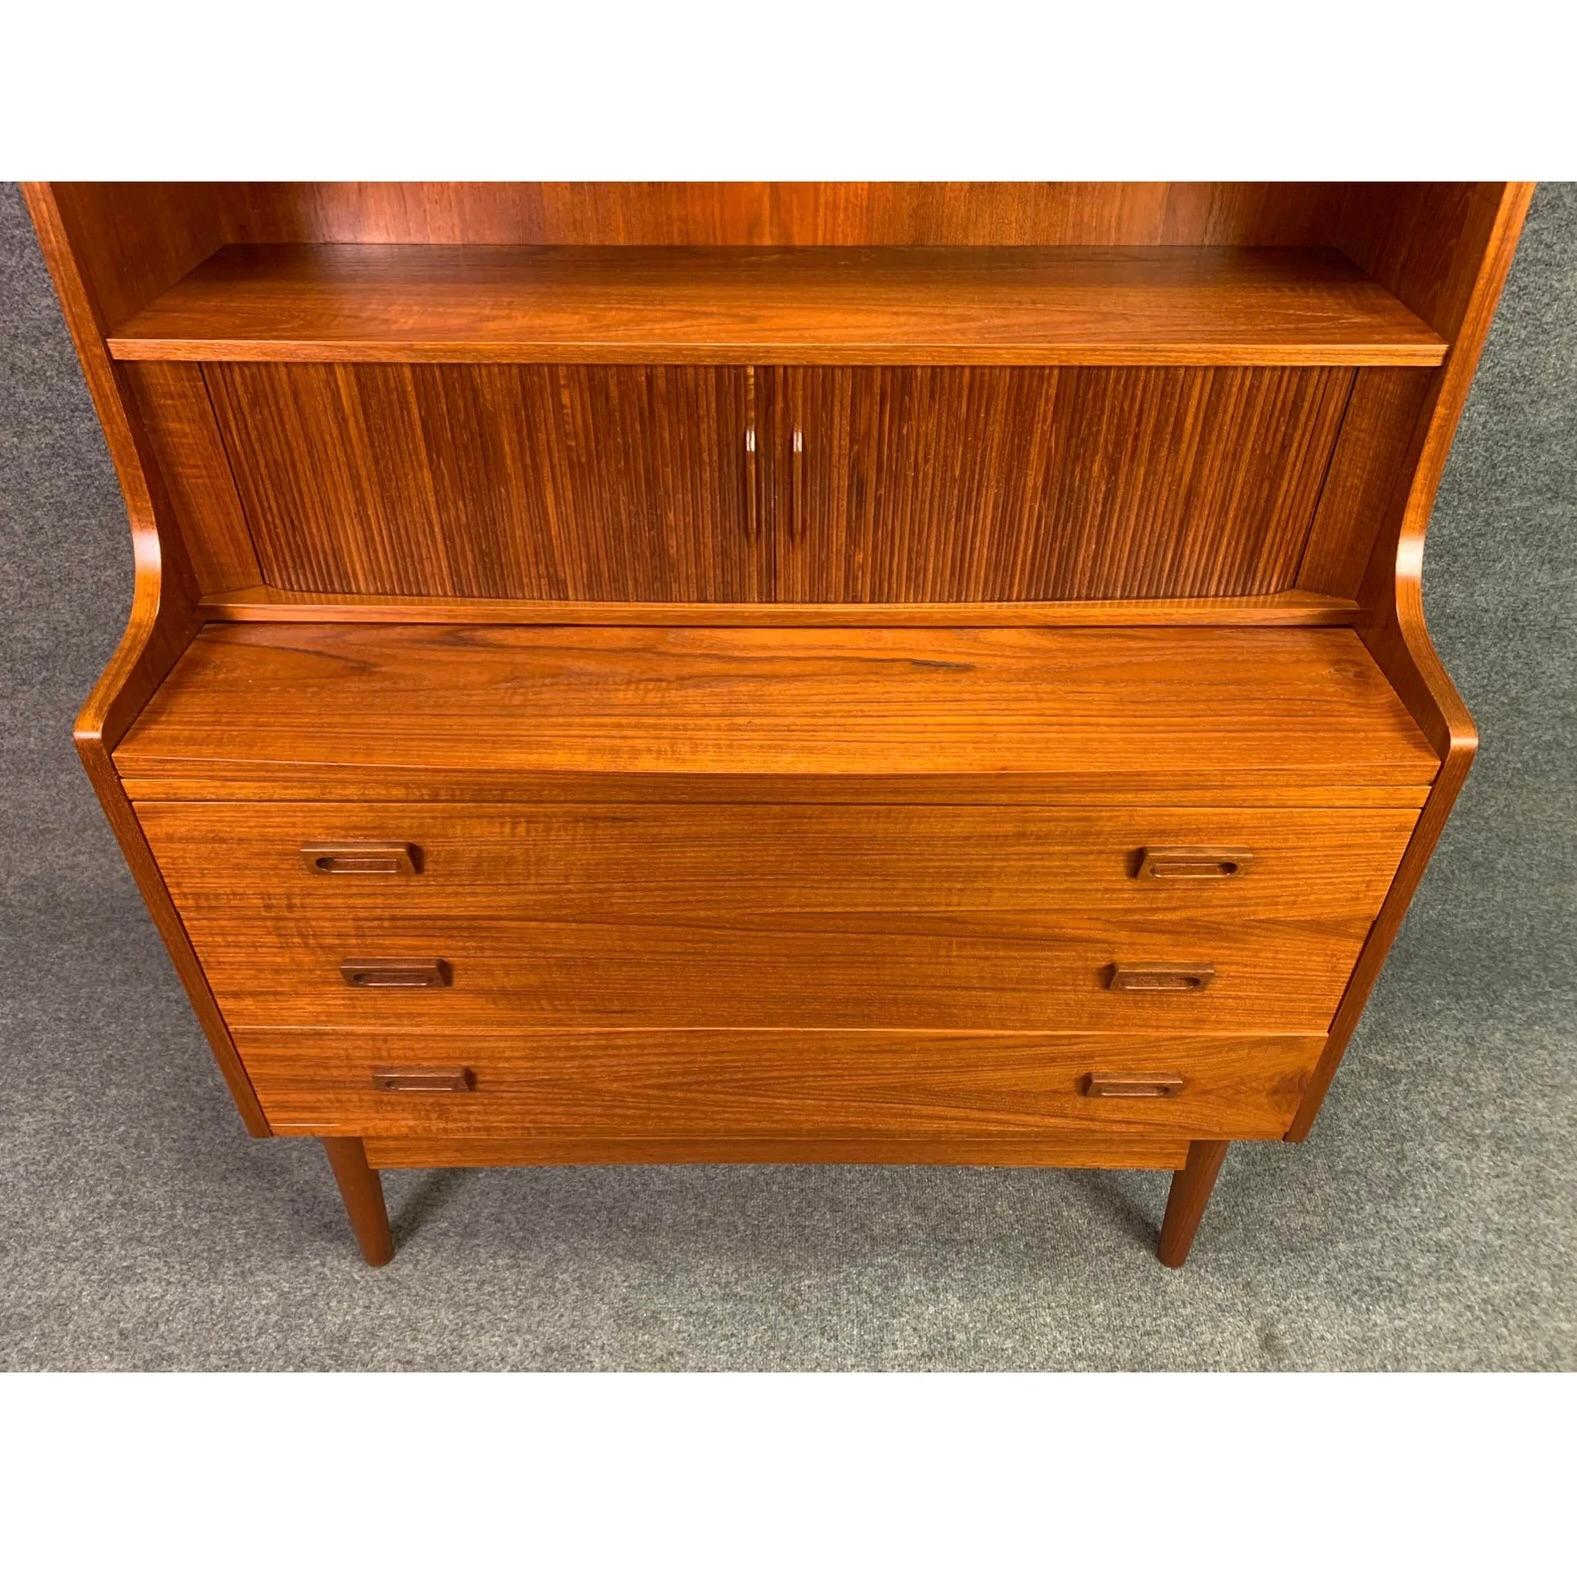 Here is a beautiful scandinavian modern secretary-desk-bookcase designed by Johannes Sorth manufactured by Nexxo Mobelfabrik in Denmark in the 1960's.
This exquisite piece, recently imported from Europe to California before its refinishing,